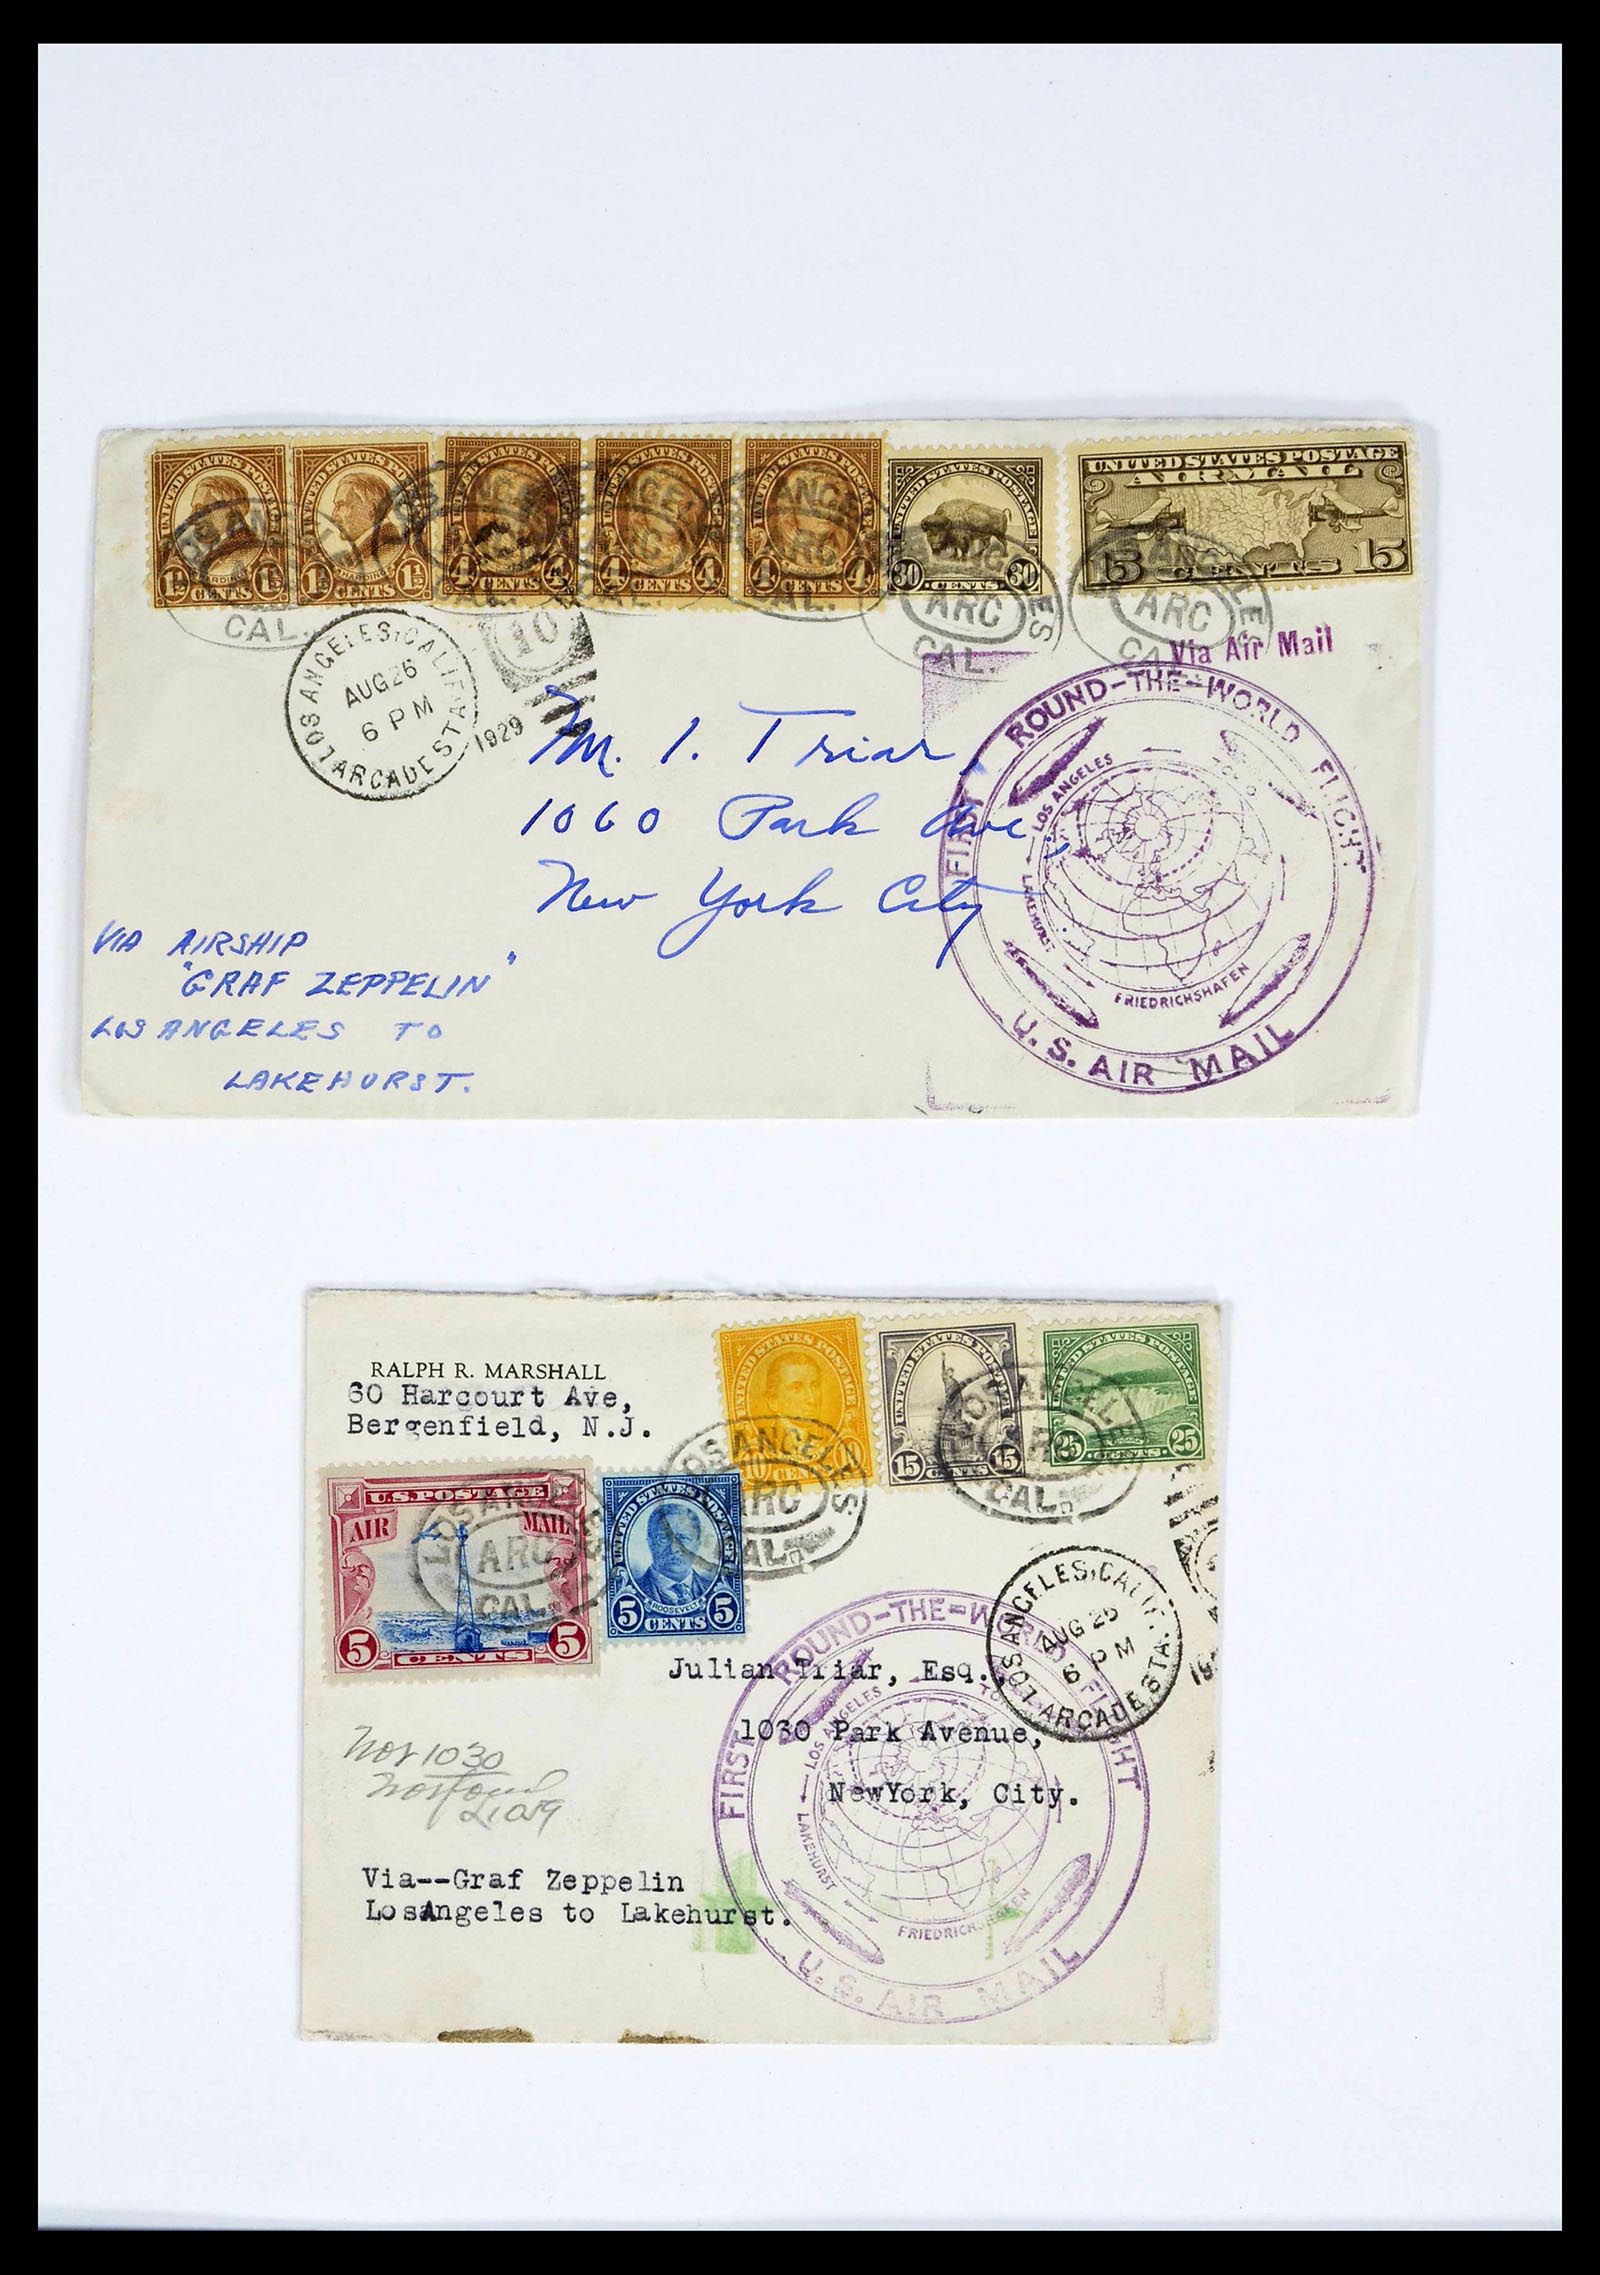 39032 0003 - Stamp collection 39032 Zeppelin covers 1928-1933.